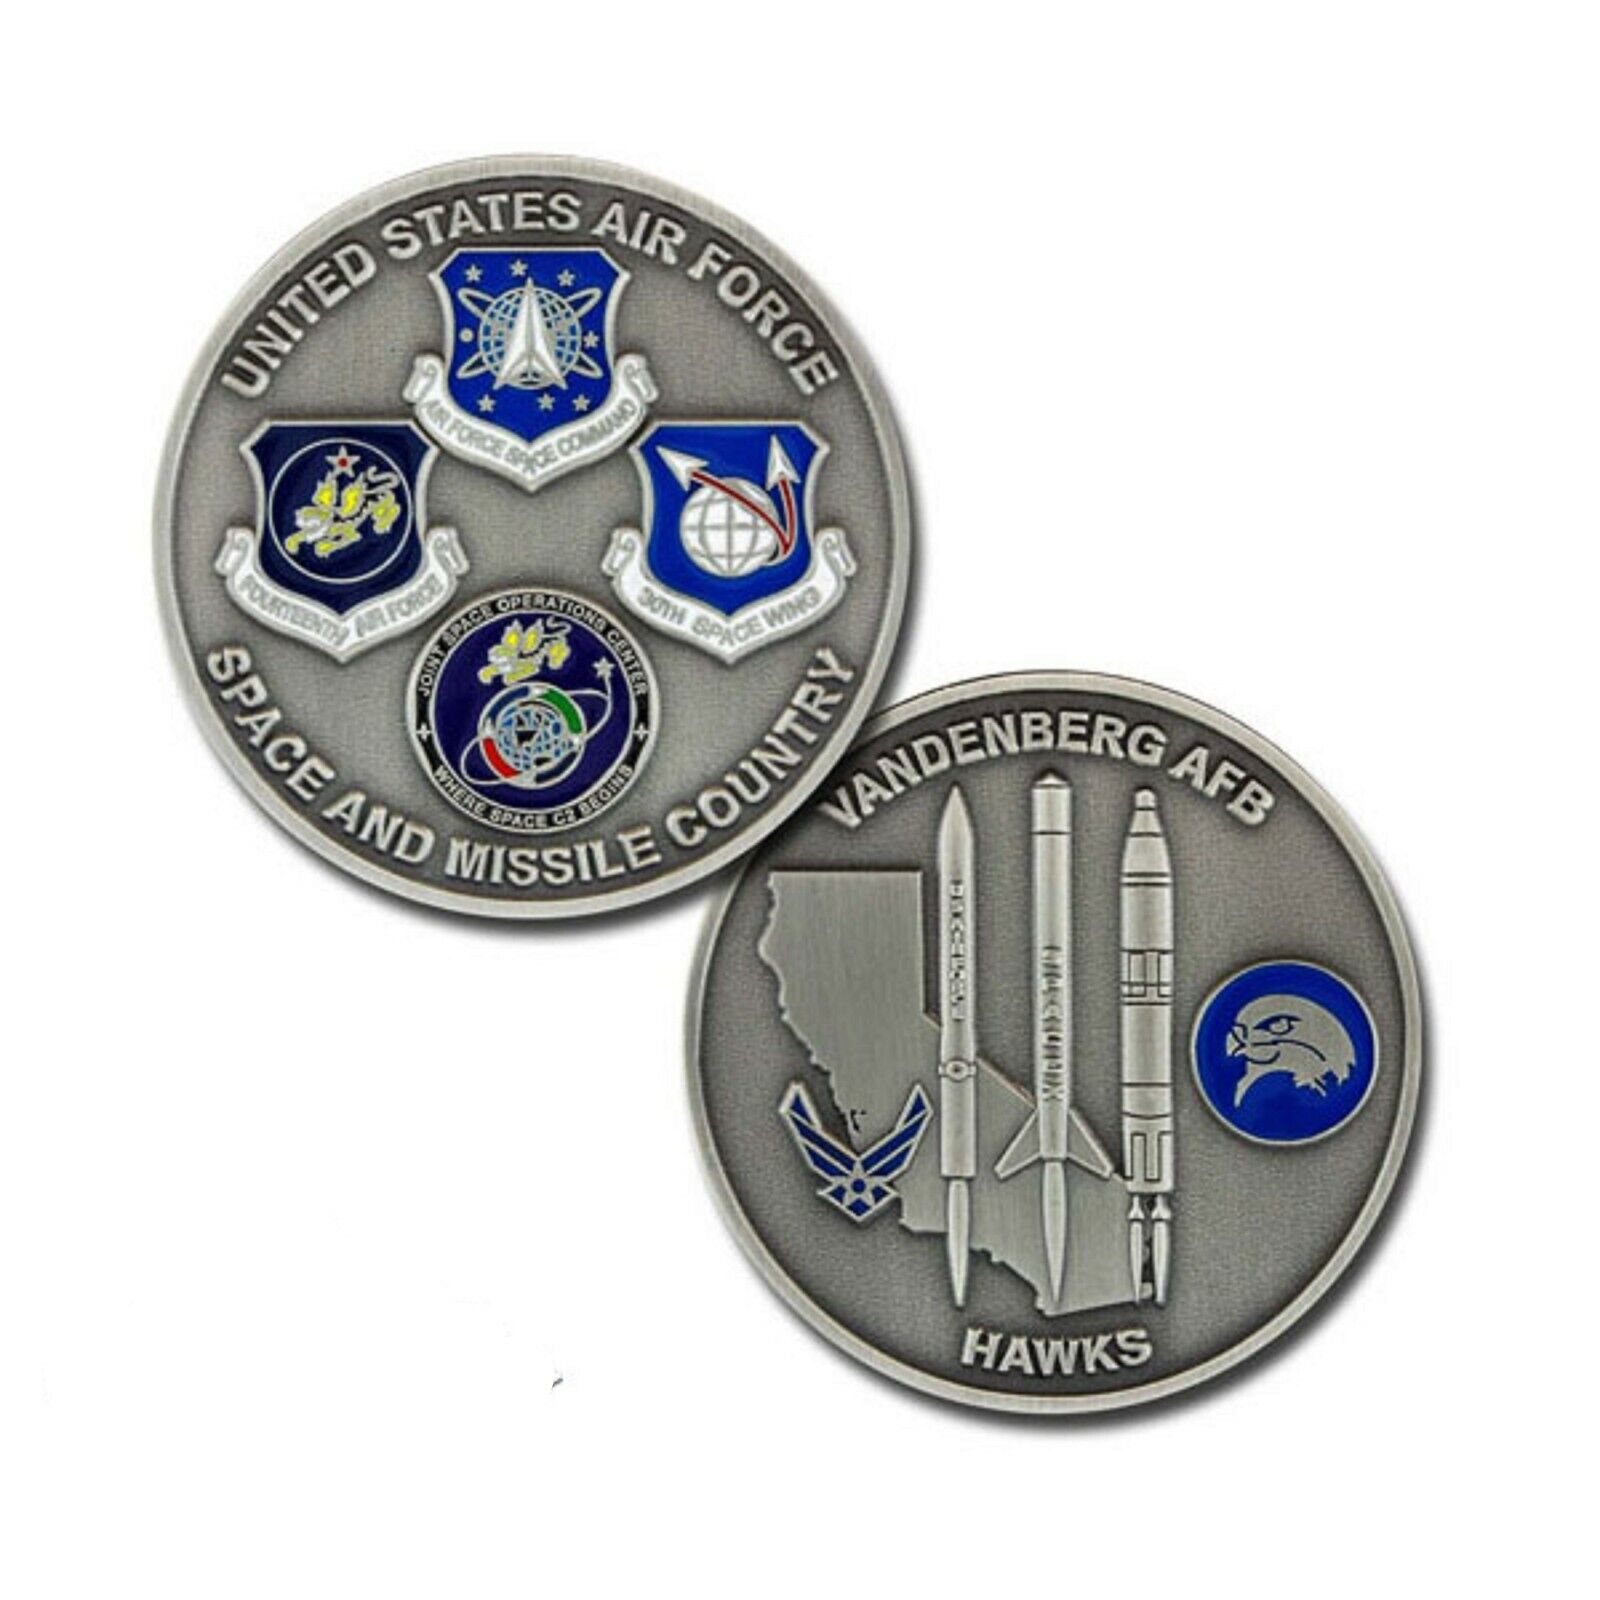 VANDENBERG AIR FORCE BASE HAWKS SPACE AND MISSILE COUNTRY 1.75